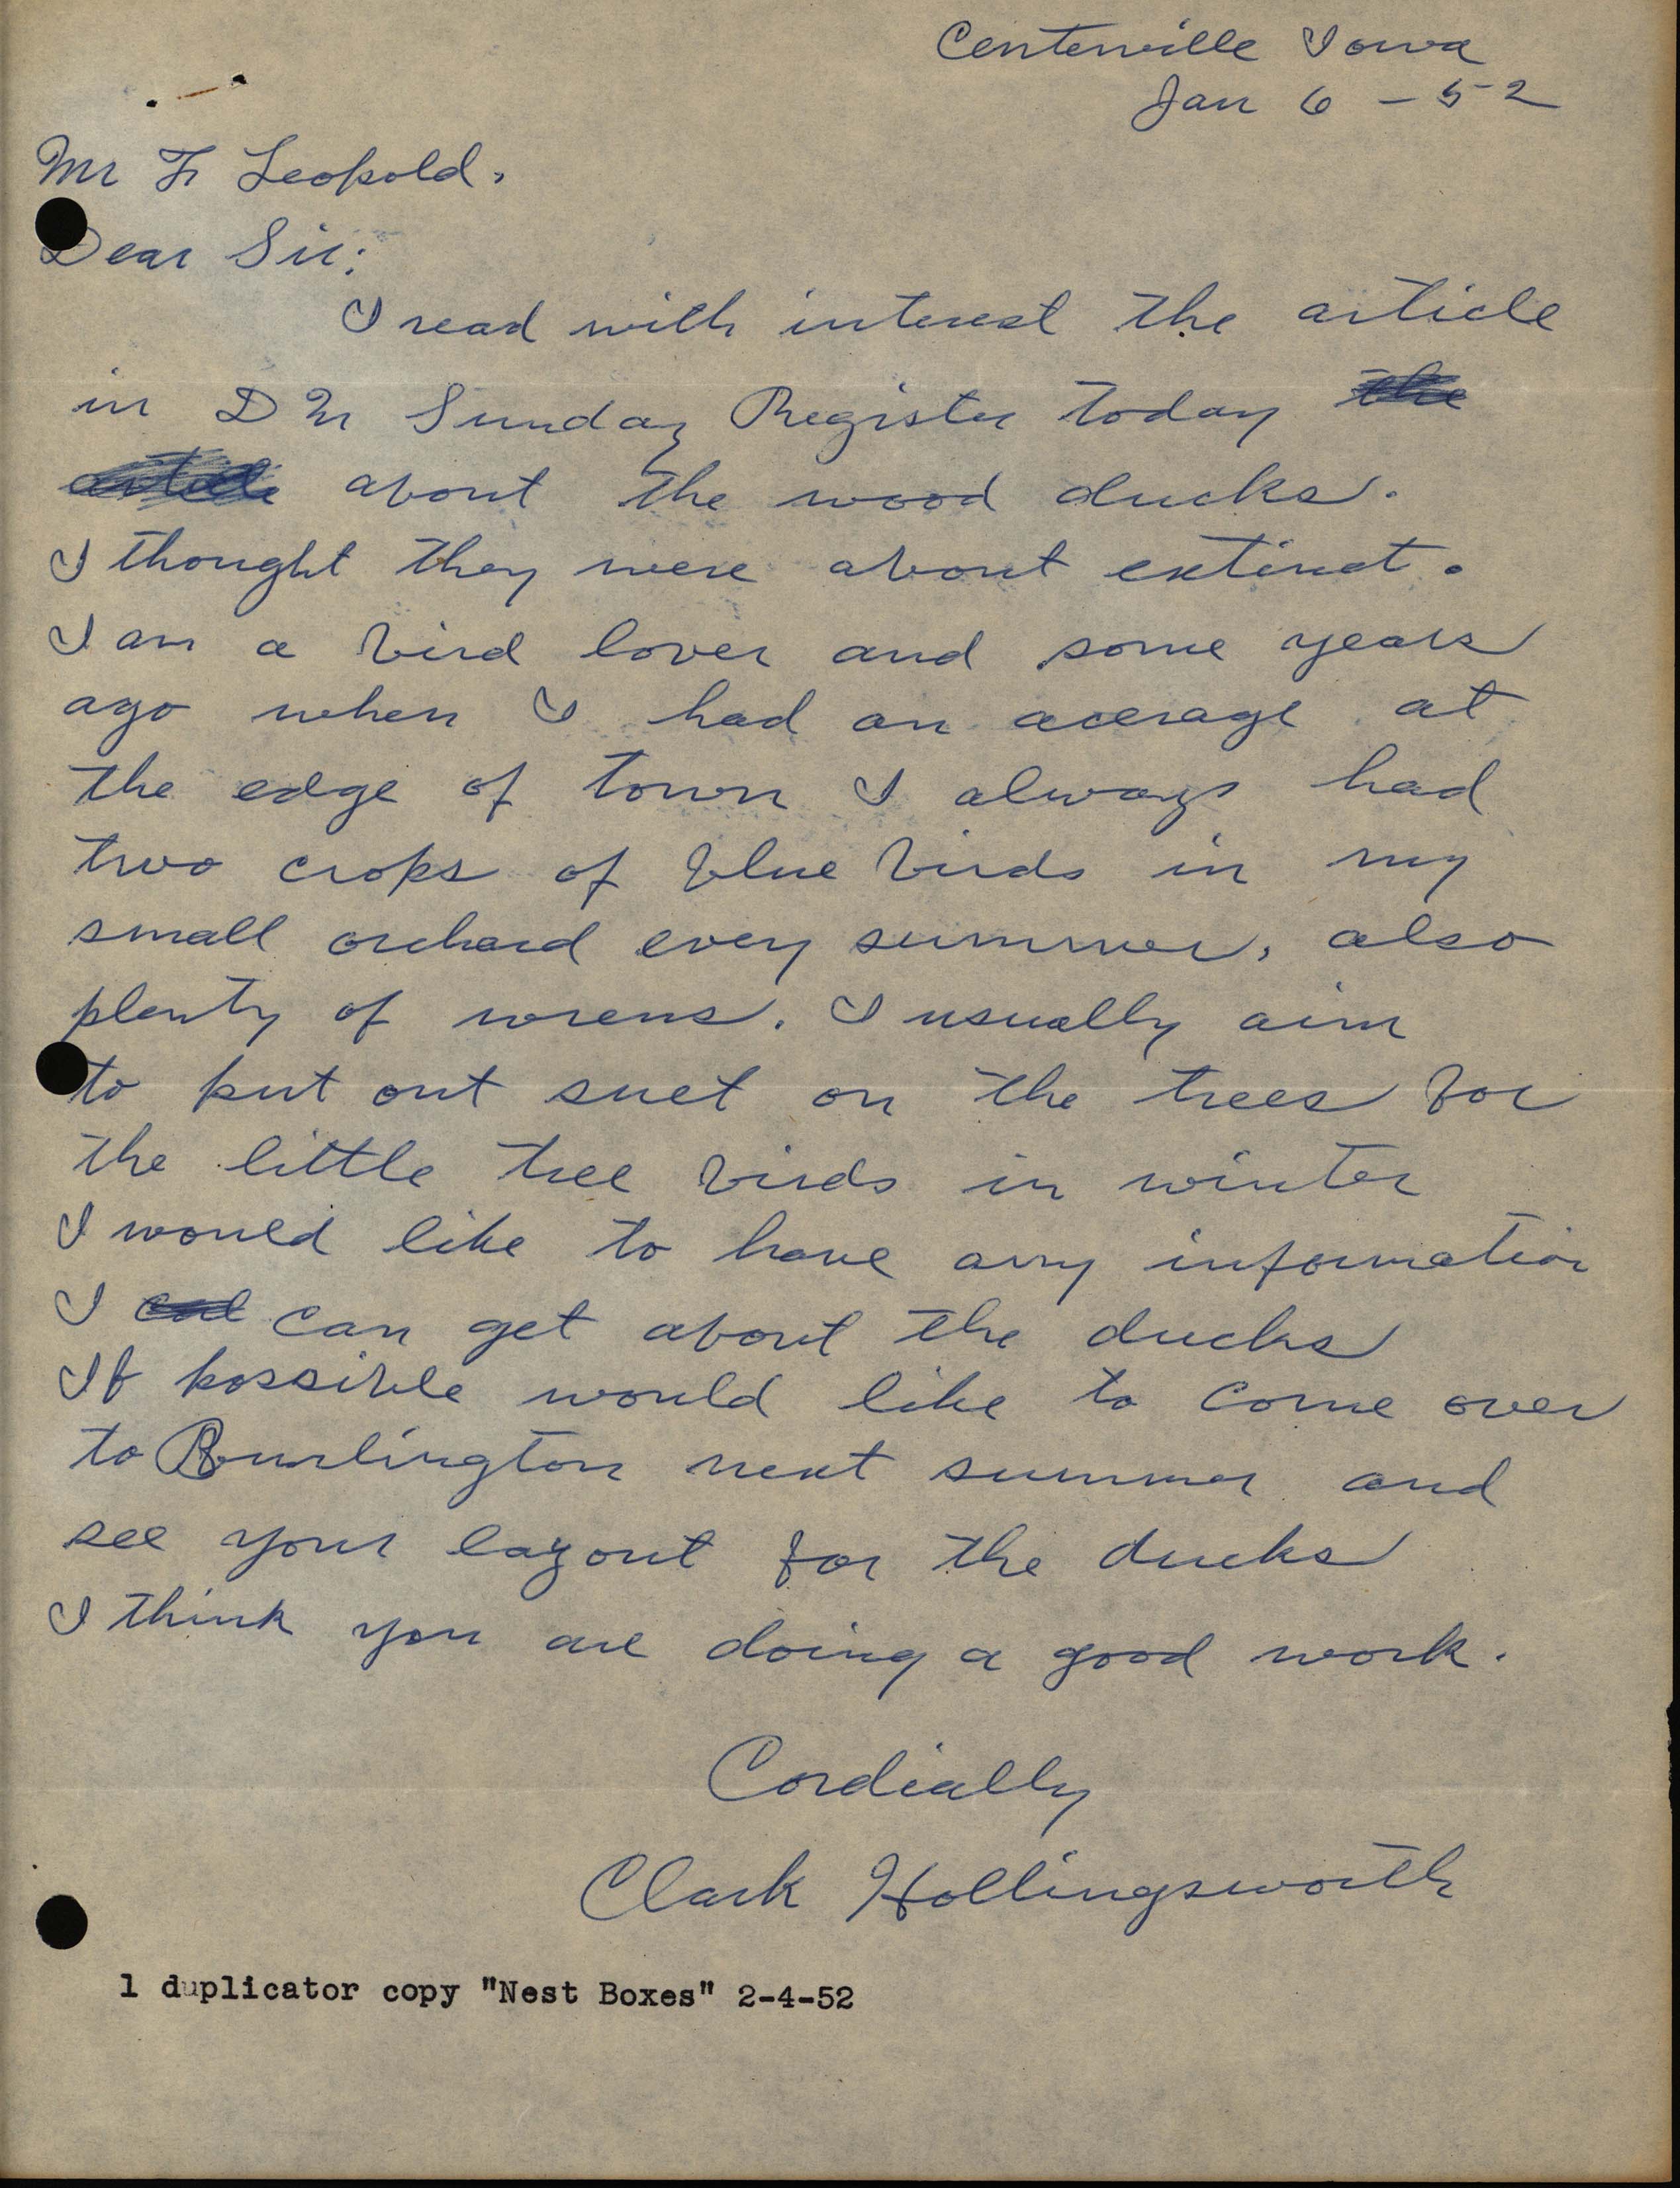 Clark Hollingsworth letter to Frederic Leopold regarding a request for information on Wood Ducks, January 6, 1952